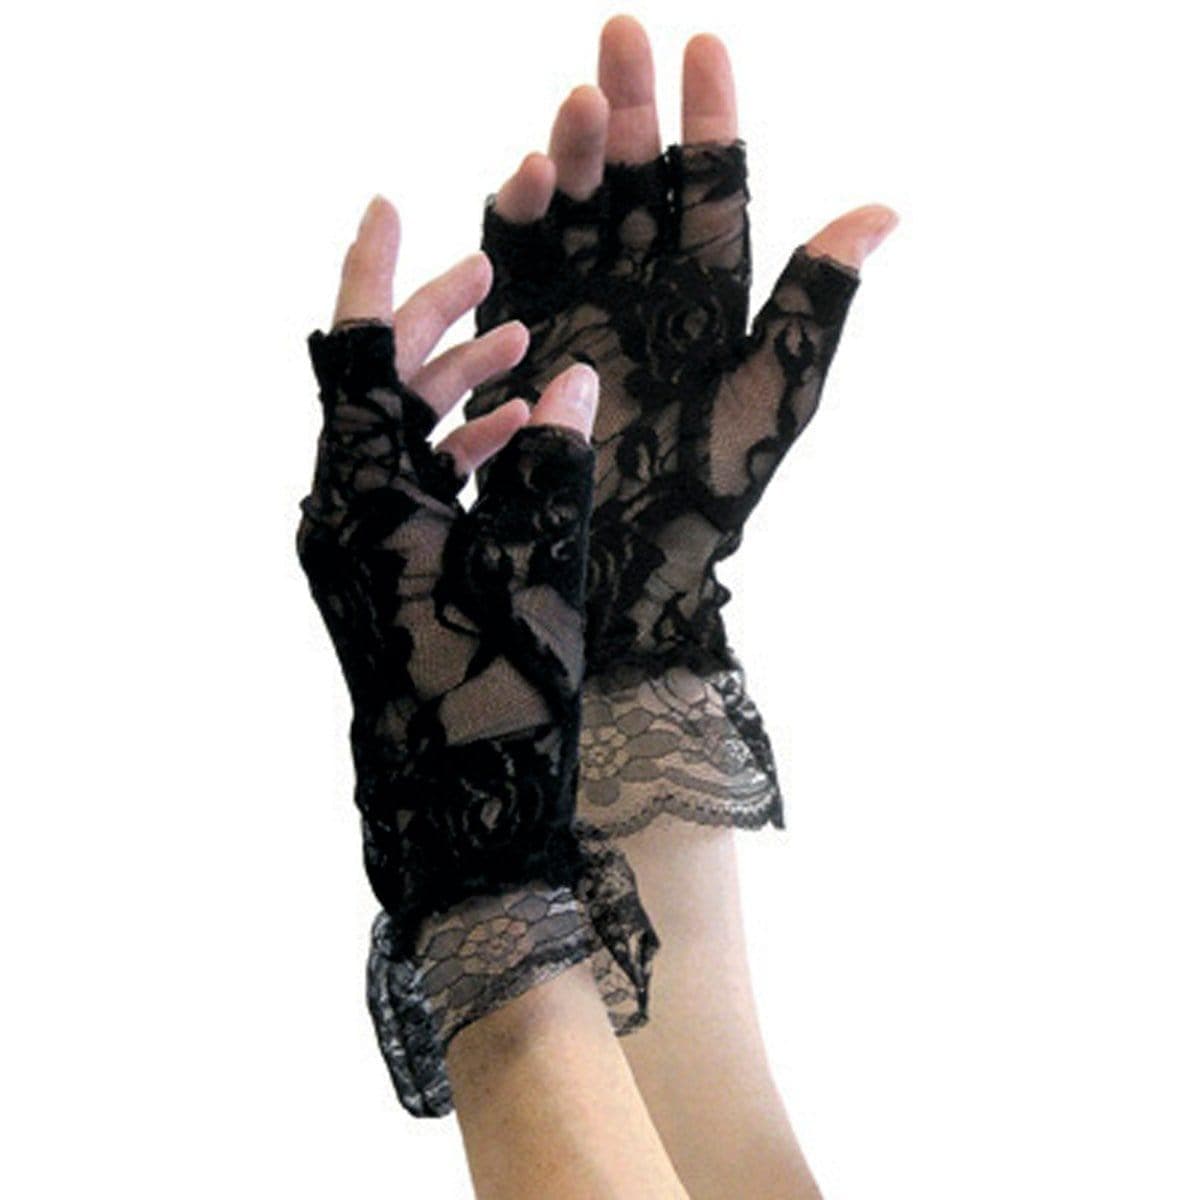 Buy Costume Accessories Black fingerless lace gloves for adults sold at Party Expert